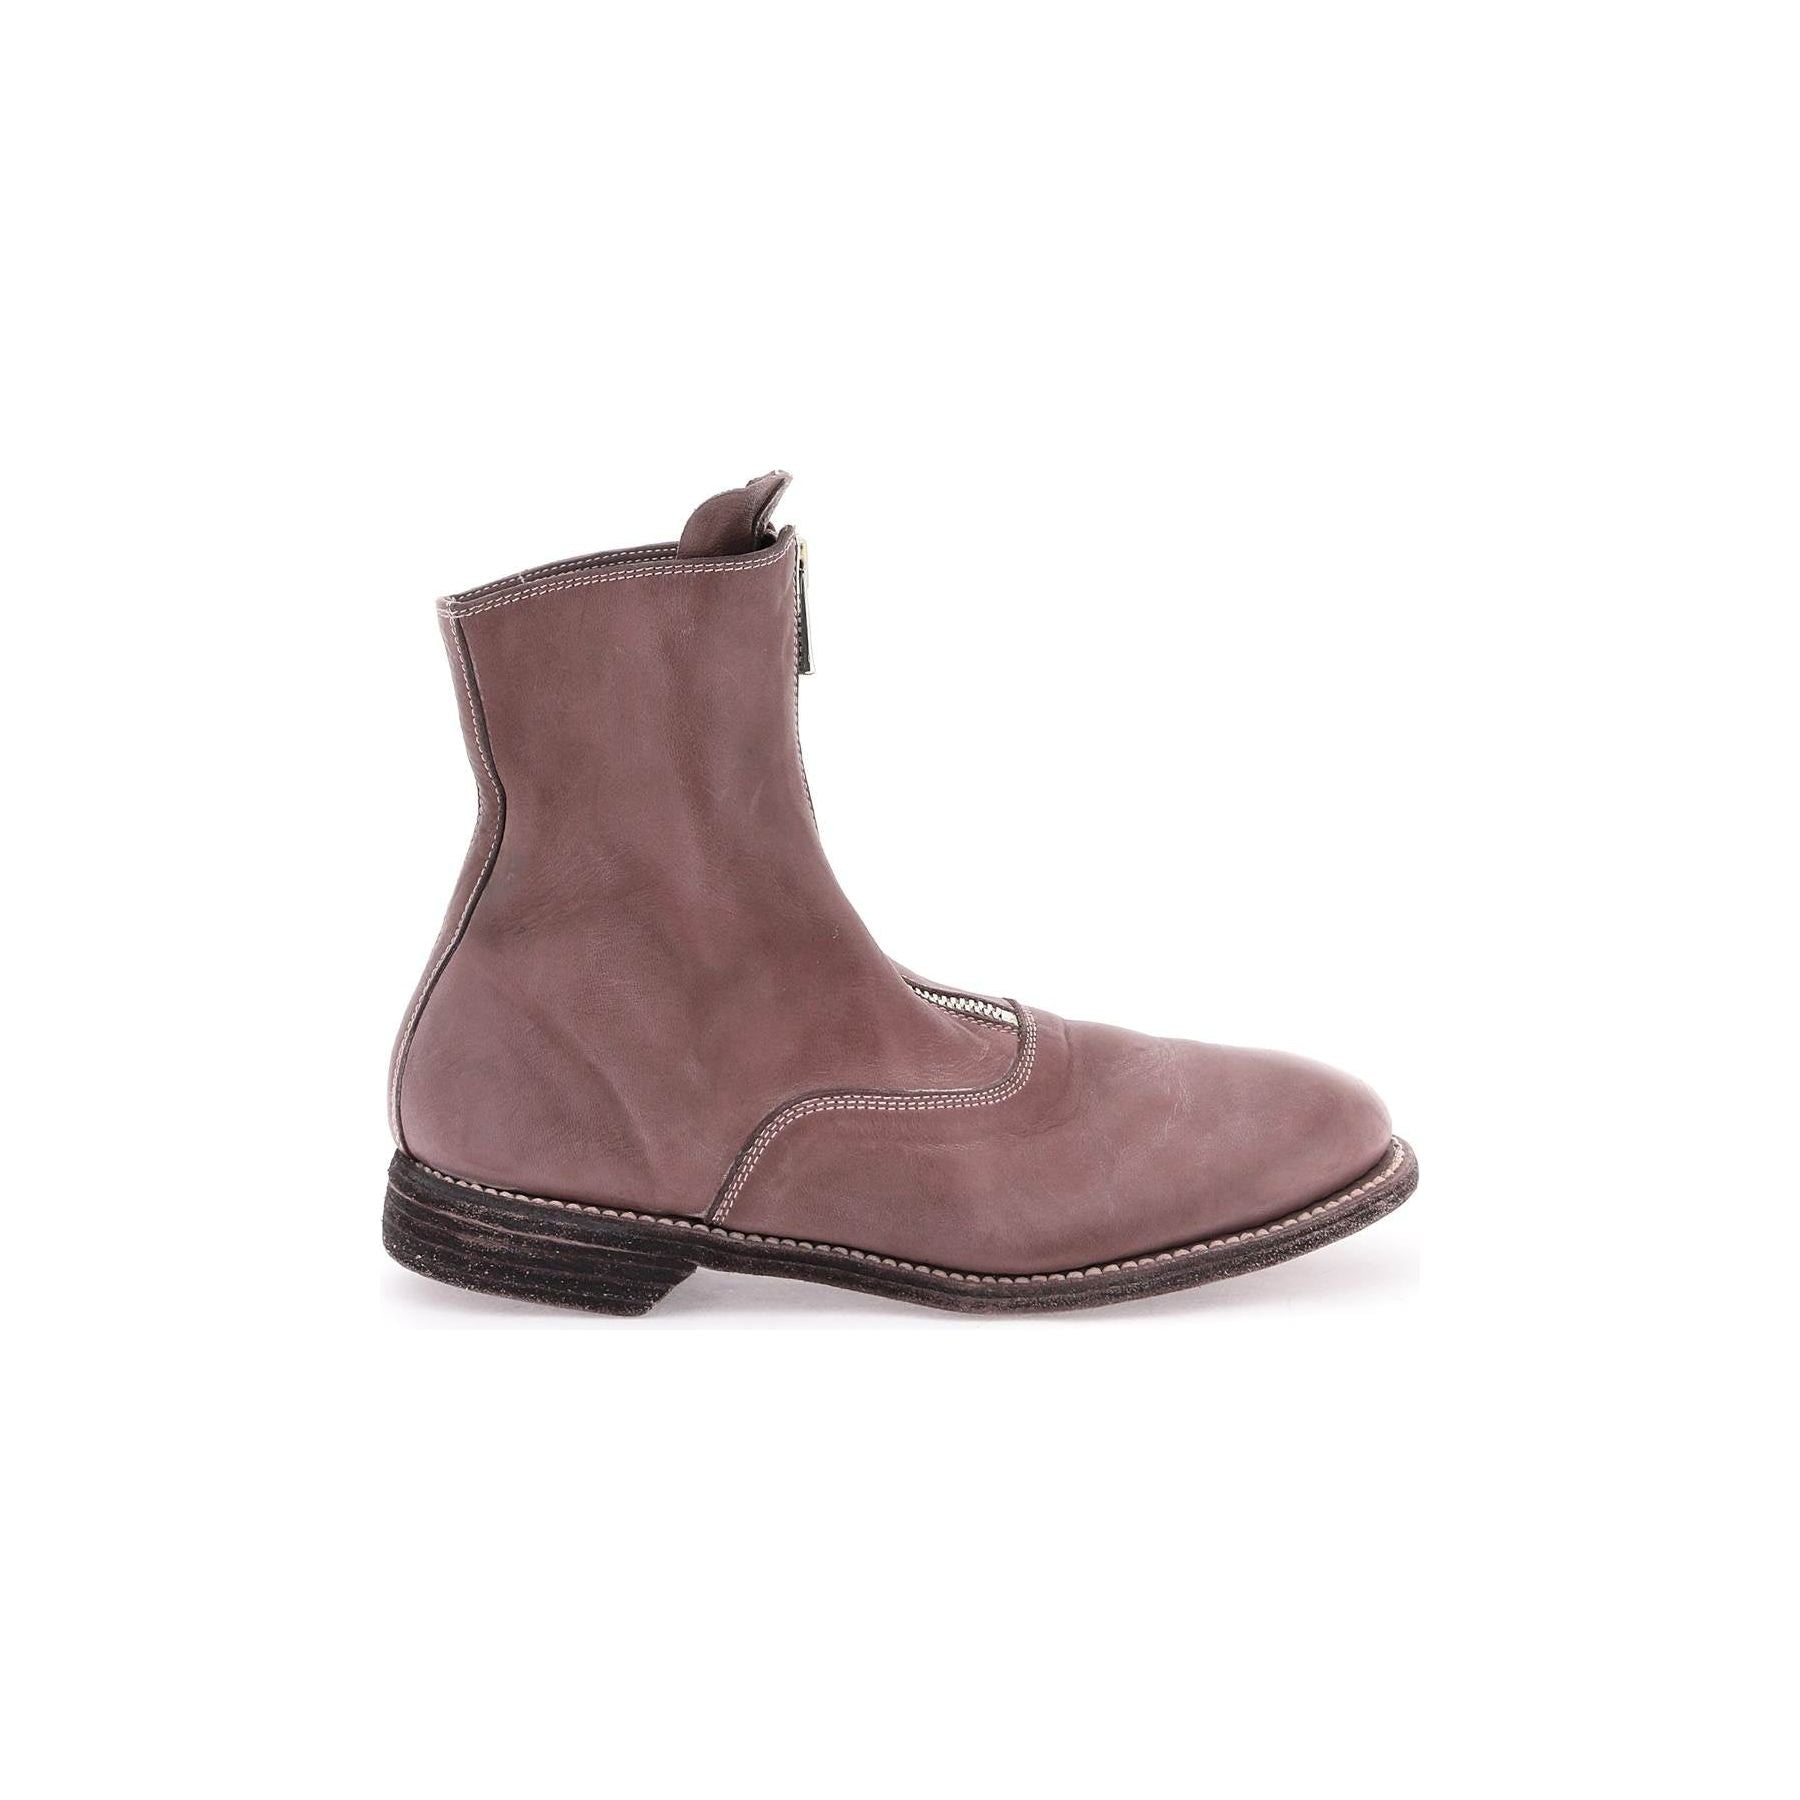 Front Zip Leather Ankle Boots